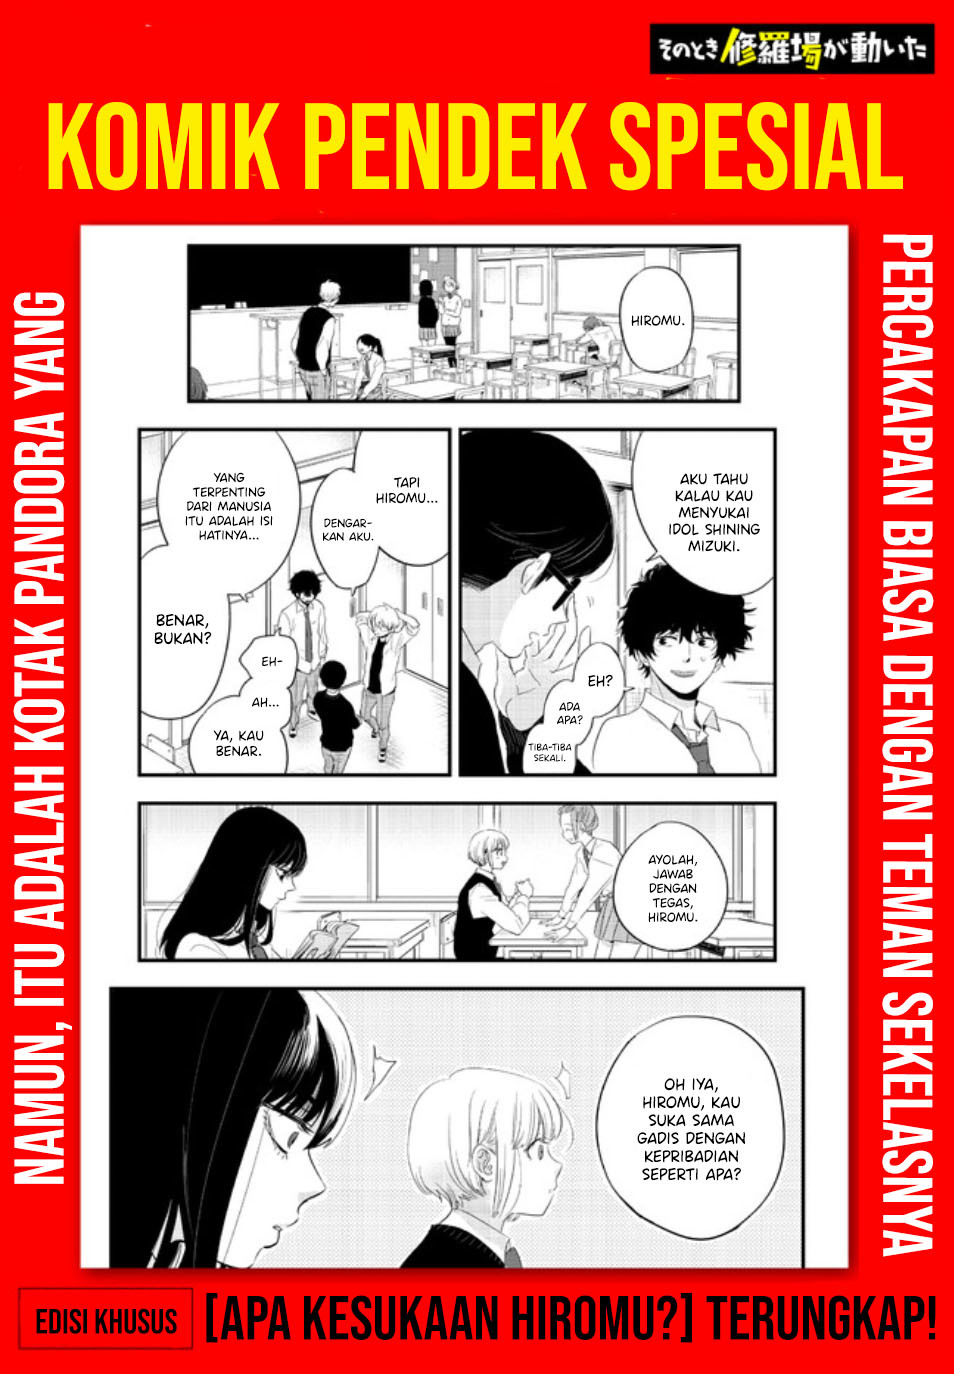 At That Time, The Battle Began (Yandere x Yandere) Chapter 15.5